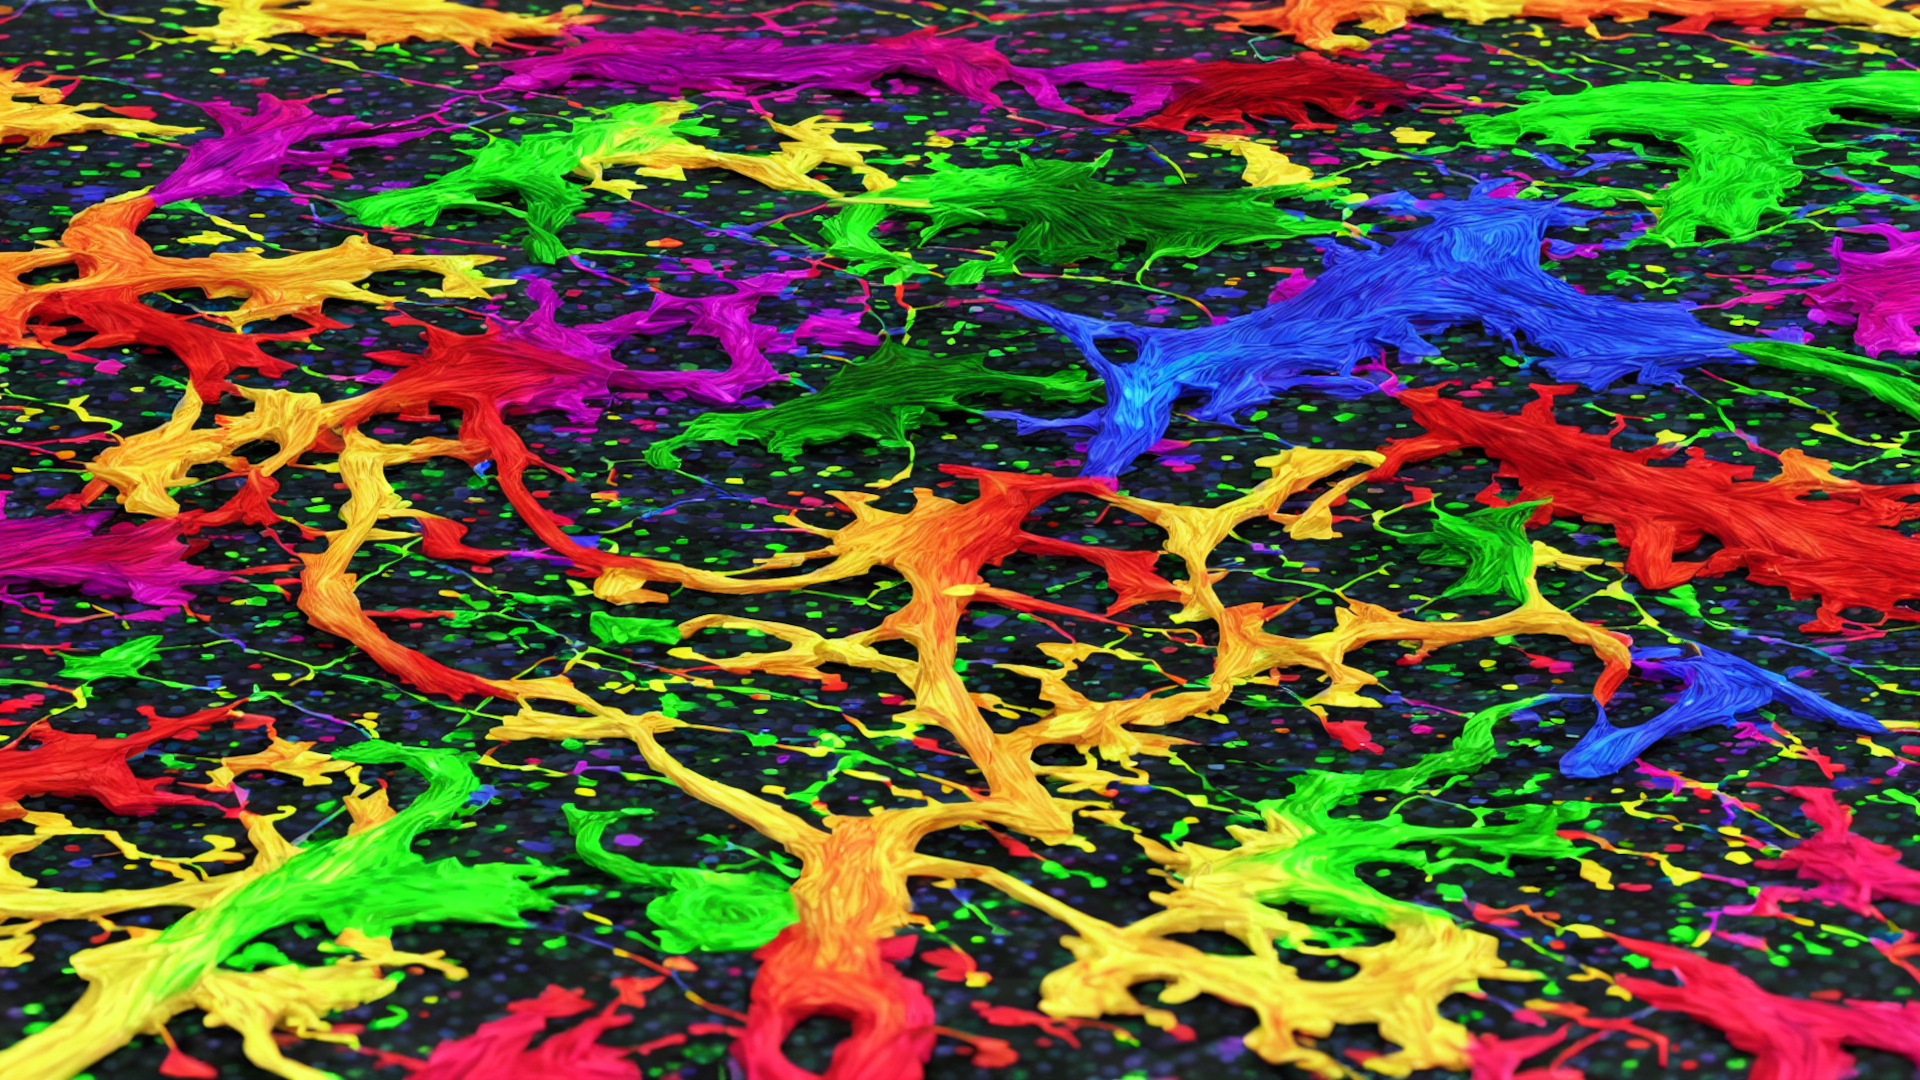 Artwork Abstract Colorful Paint Splash Painting 1920x1080